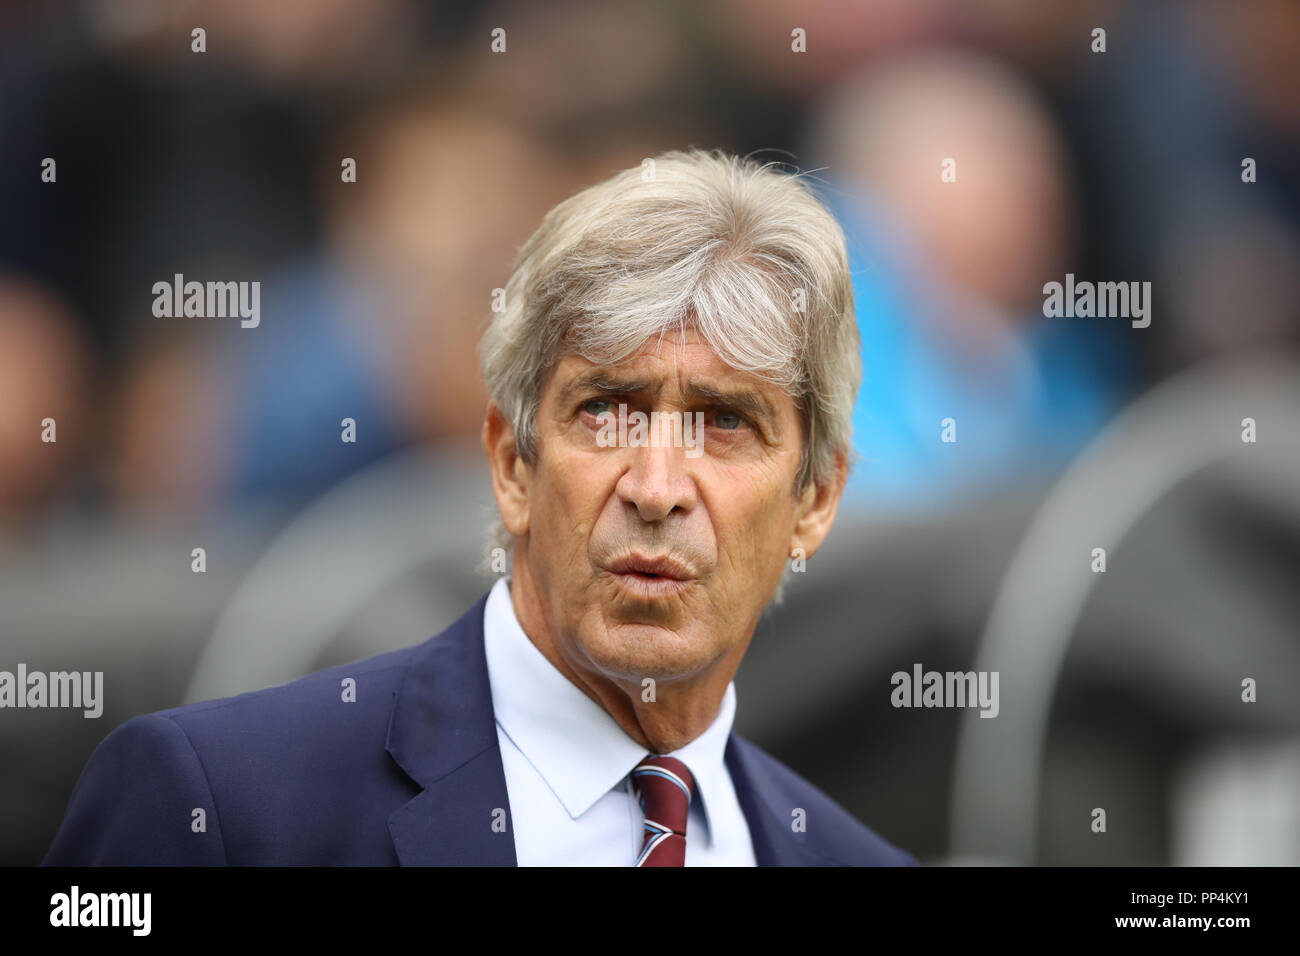 West Ham United manager Manuel Pellegrini during the Premier League match at London Stadium. PRESS ASSOCIATION Photo. Picture date: Sunday September 23, 2018. See PA story SOCCER West Ham. Photo credit should read: Tim Goode/PA Wire. RESTRICTIONS: No use with unauthorised audio, video, data, fixture lists, club/league logos or 'live' services. Online in-match use limited to 120 images, no video emulation. No use in betting, games or single club/league/player publications. Stock Photo